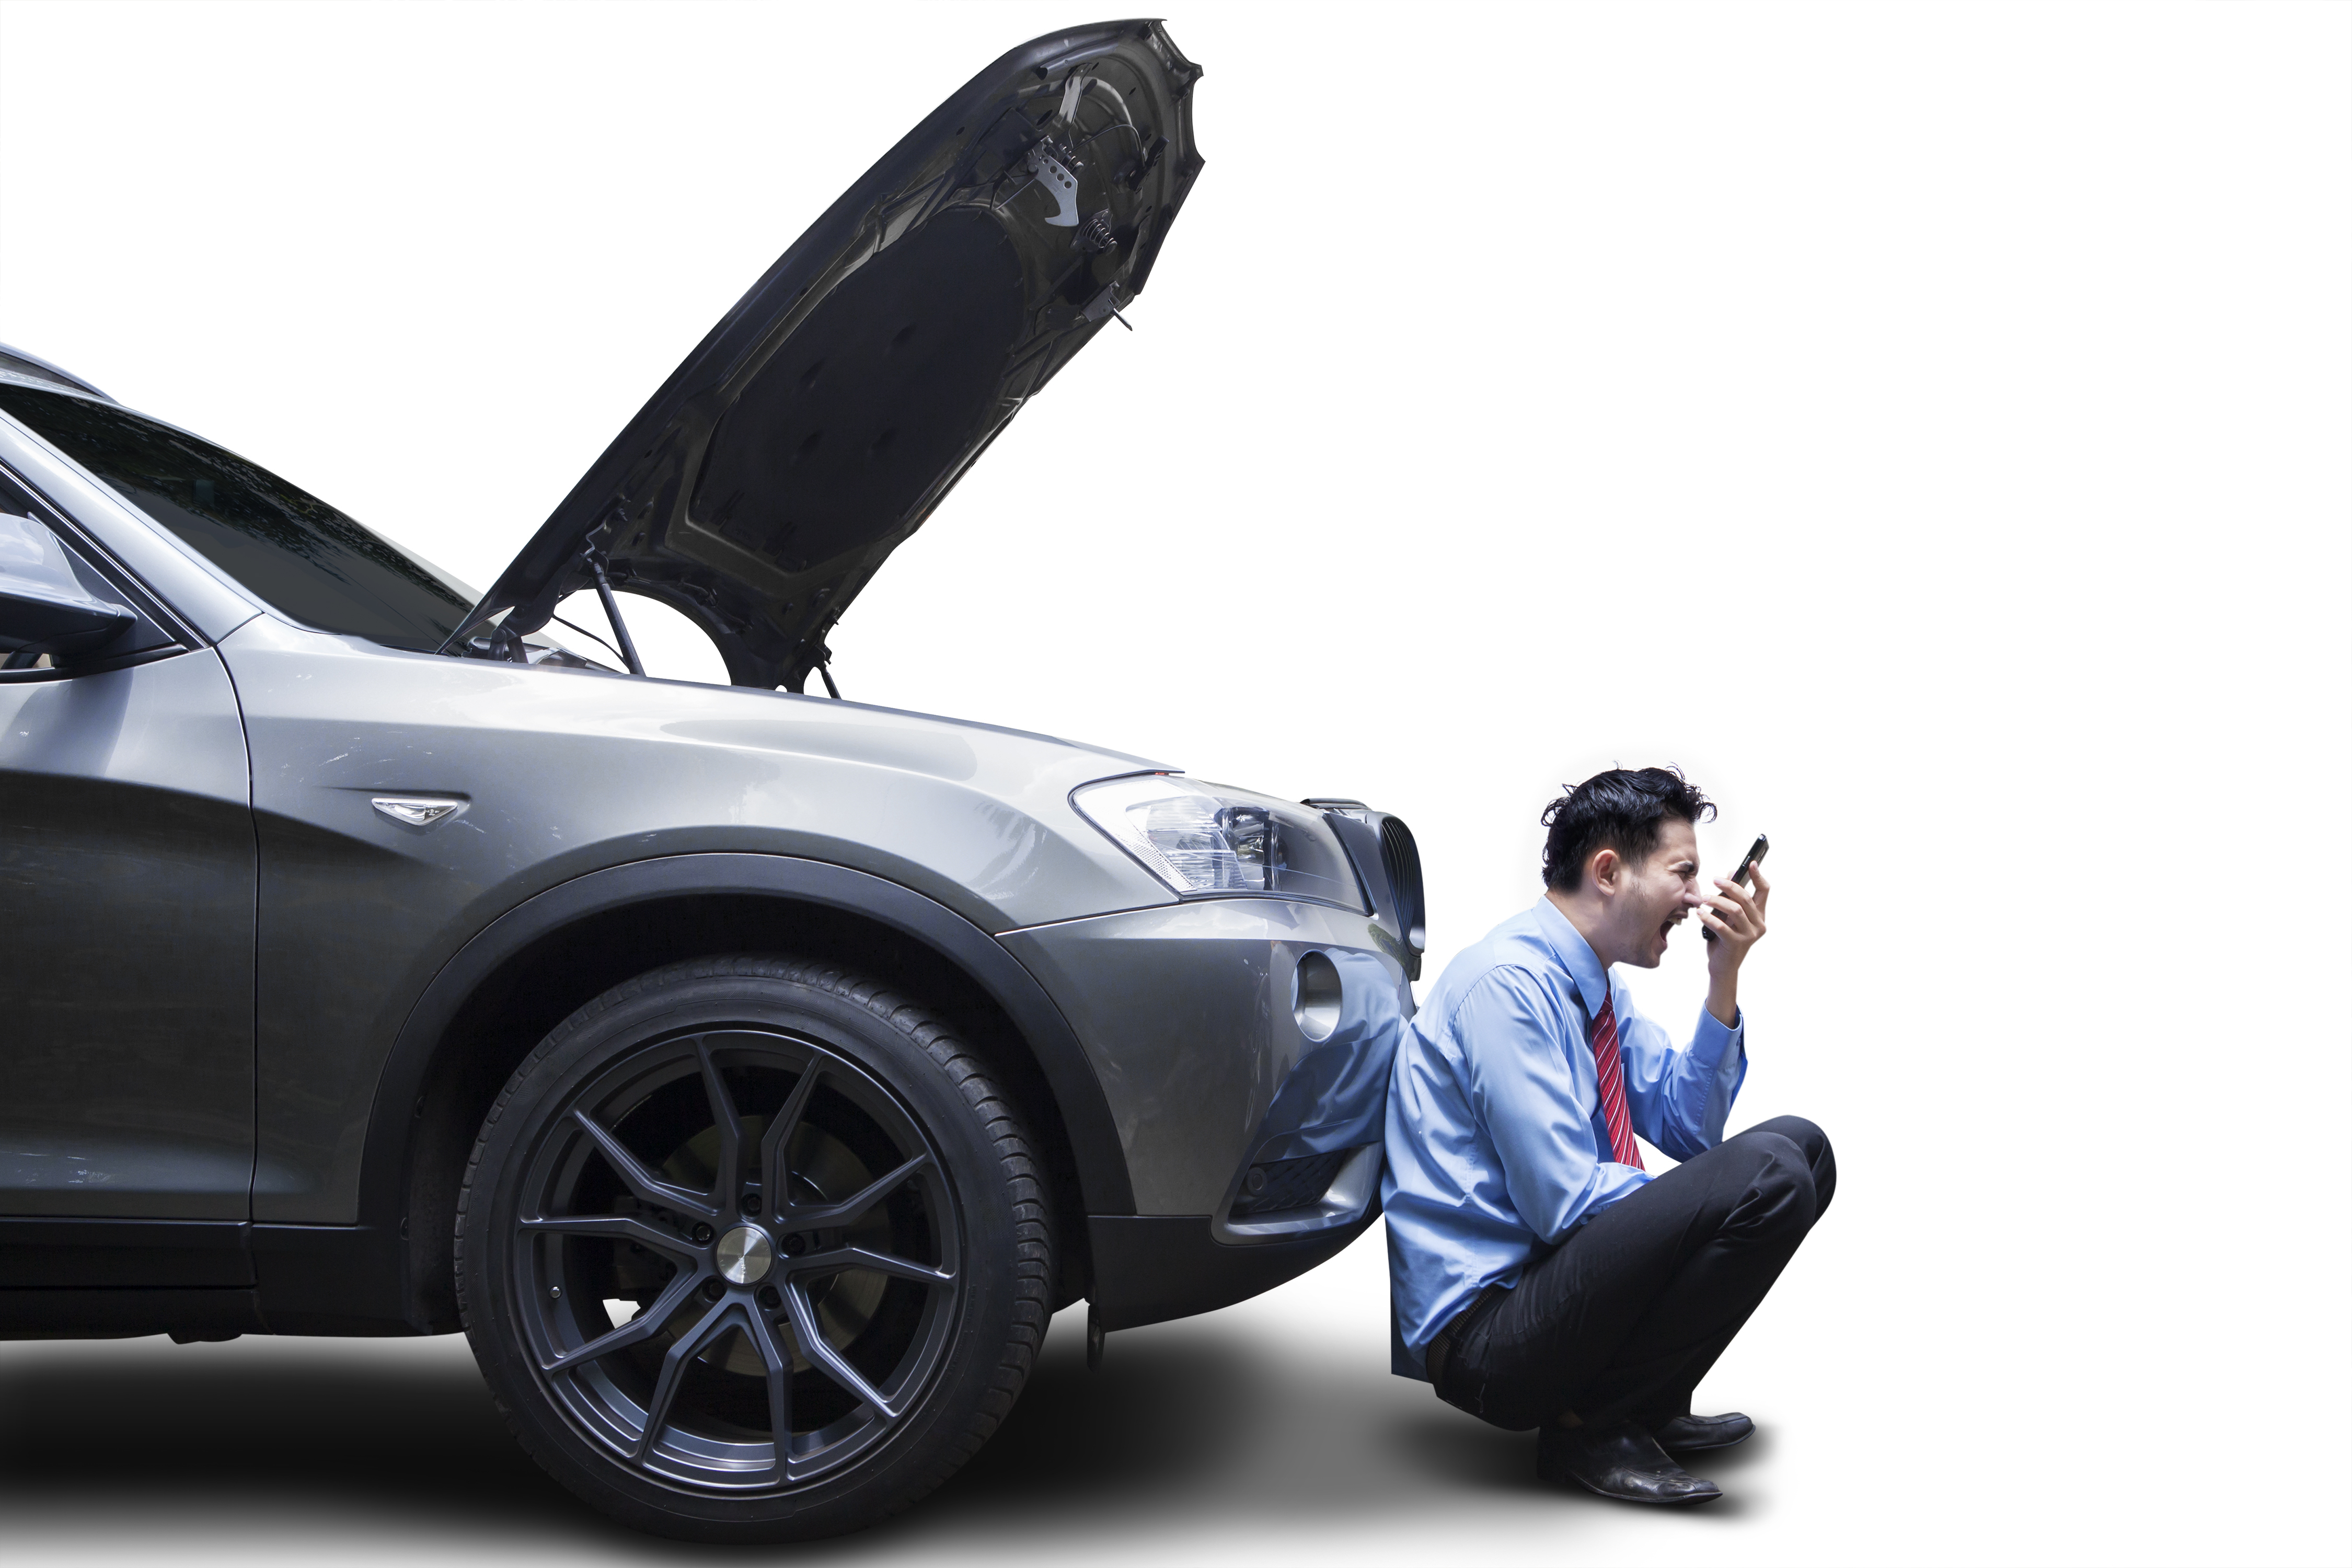 Getting Assistance During A Car Breakdown